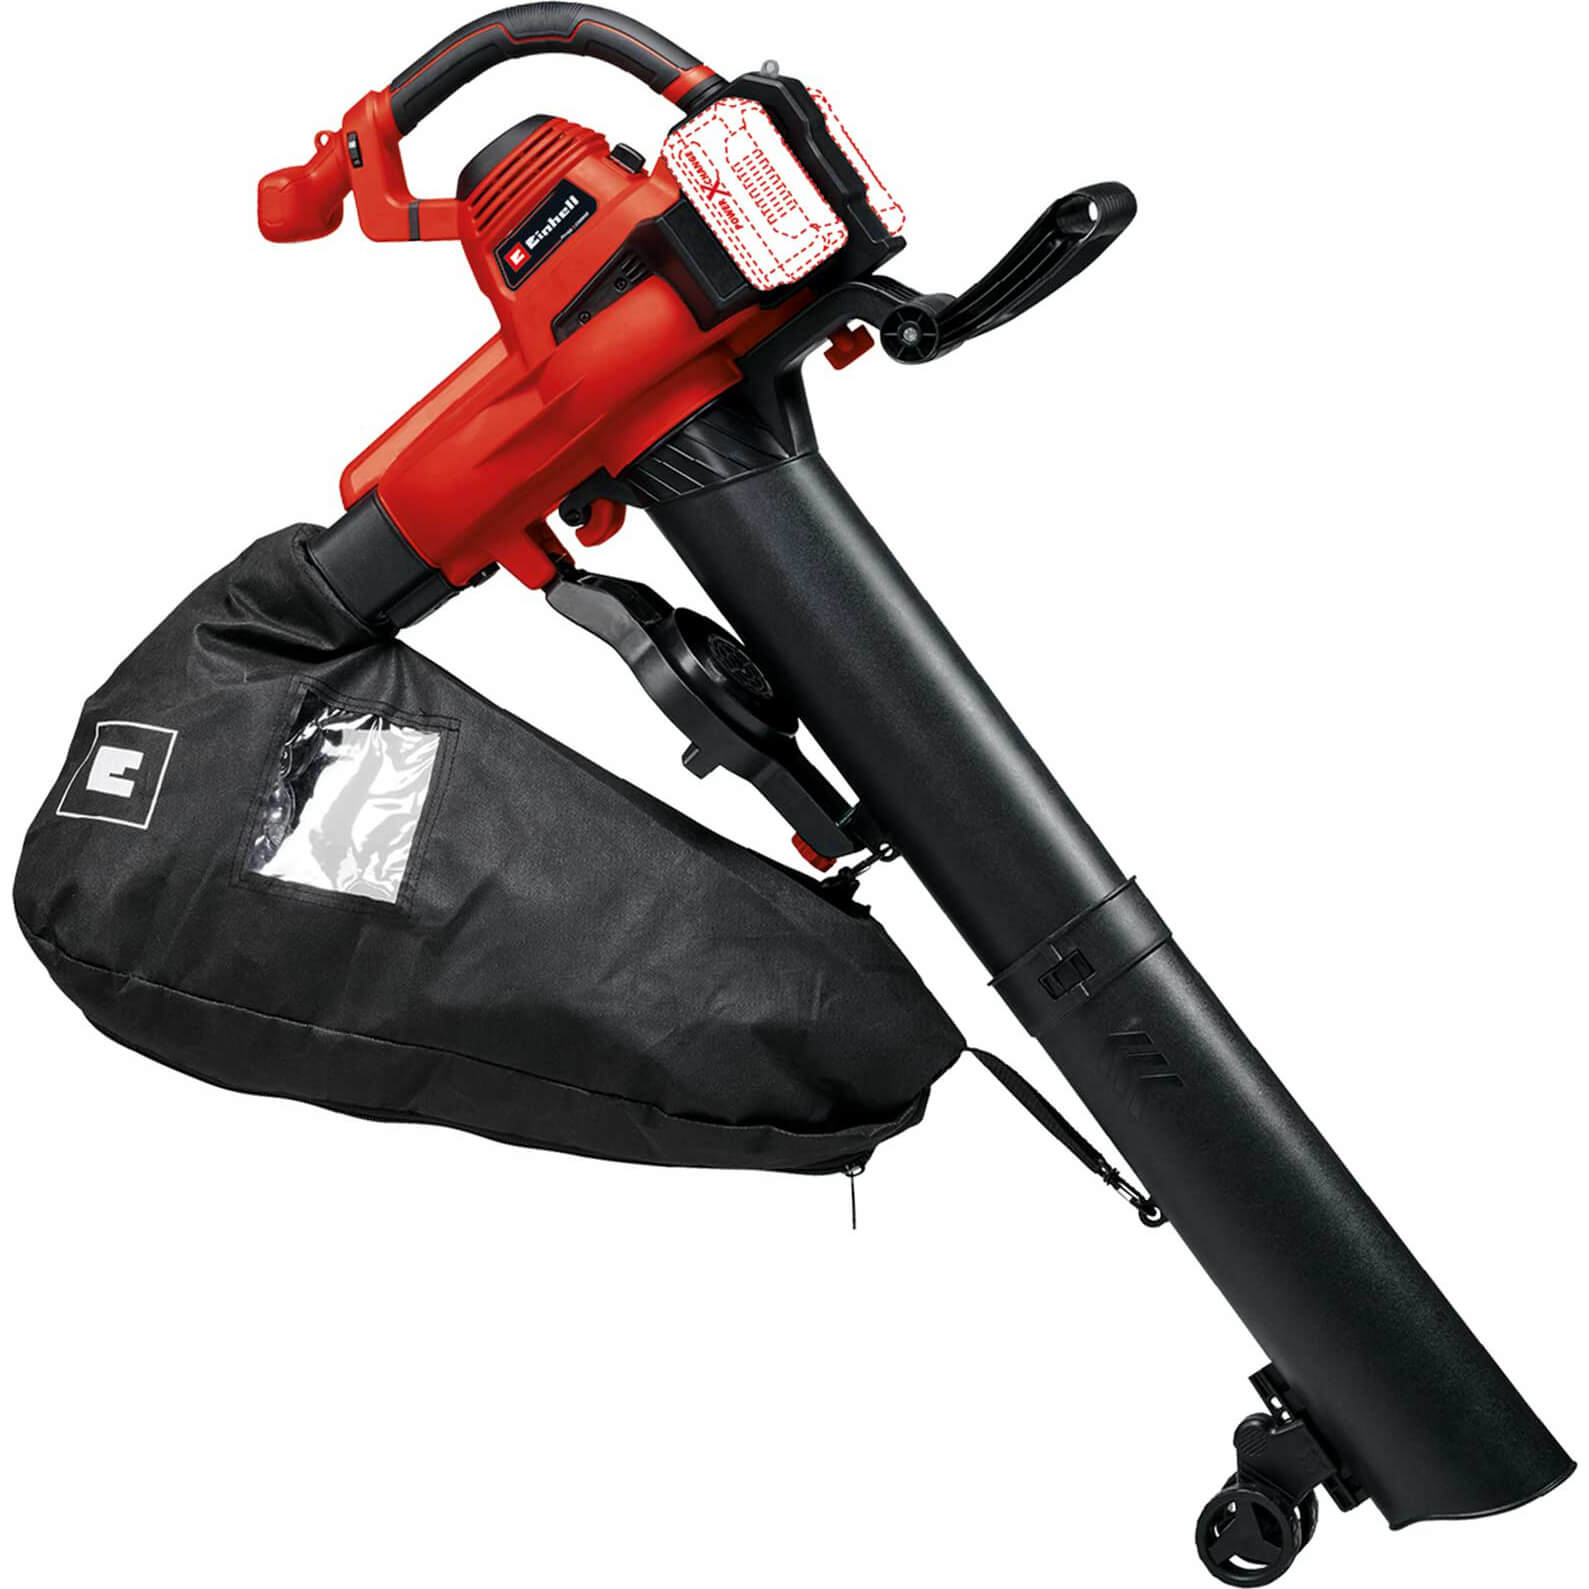 Einhell GE-CL 36/230 Li E 36v Cordless Garden Leaf Blower and Vacuum (Uses 2 x 18v) No Batteries No Charger